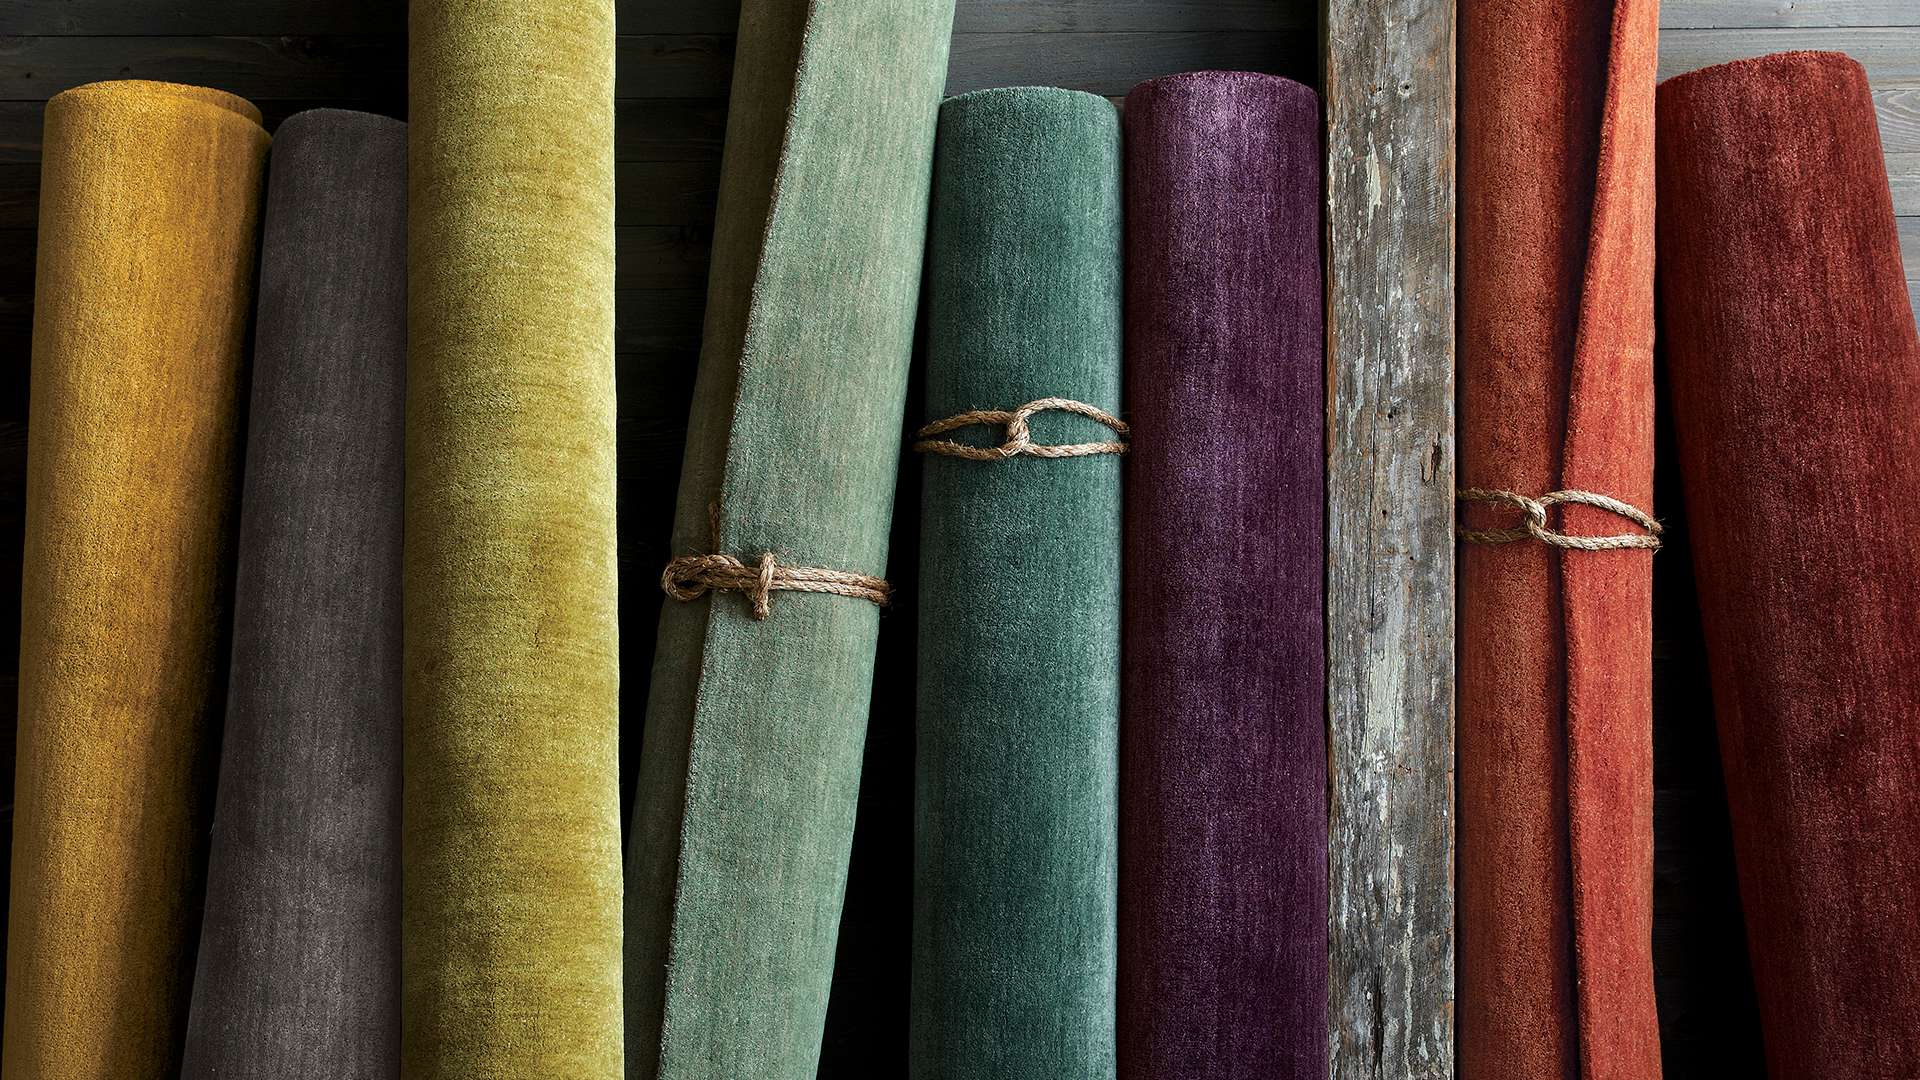 An assortment of solid-colored rugs rolled up against a wood panel wall. Shop new rugs.